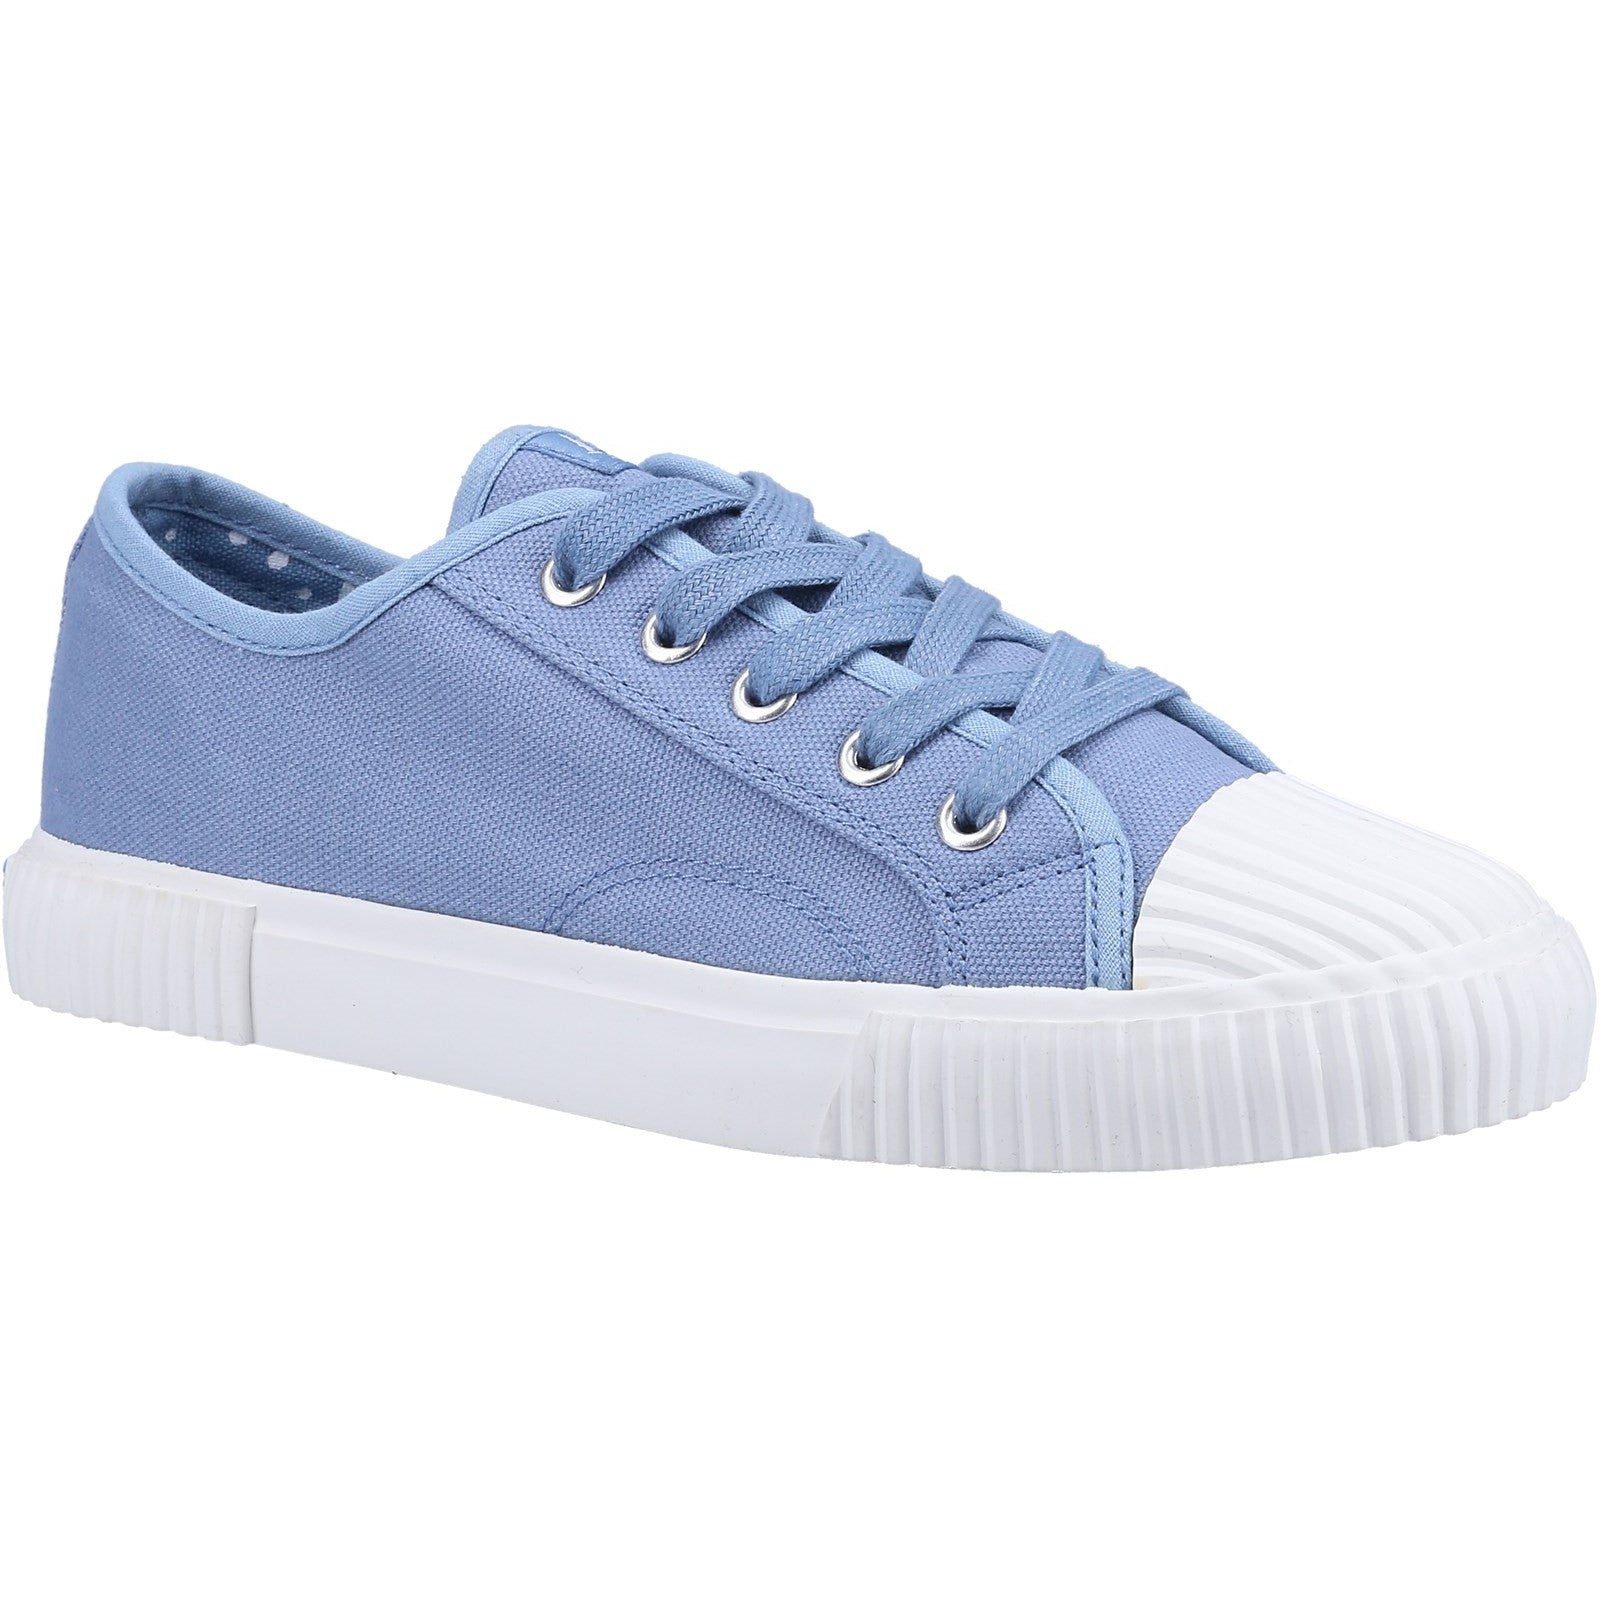 Hush Puppies Brooke Ladies Blue Textile Lace Up Trainers